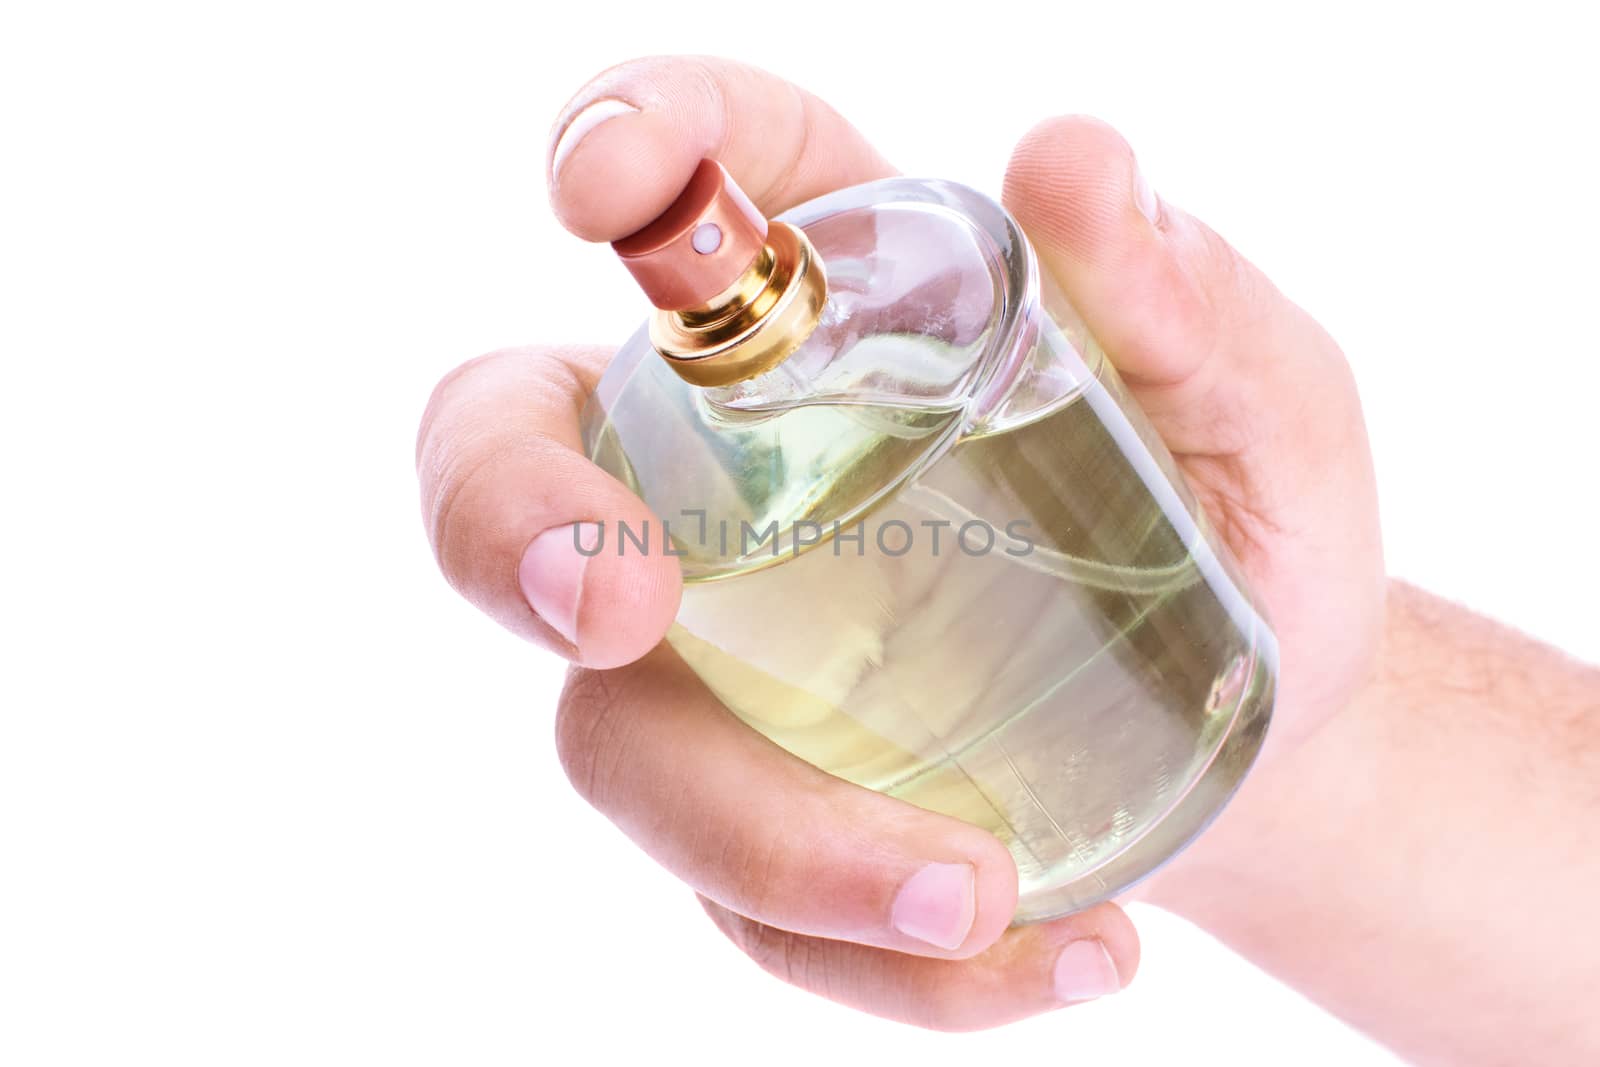 Human hand holding a perfume bottle, isolated on white background.